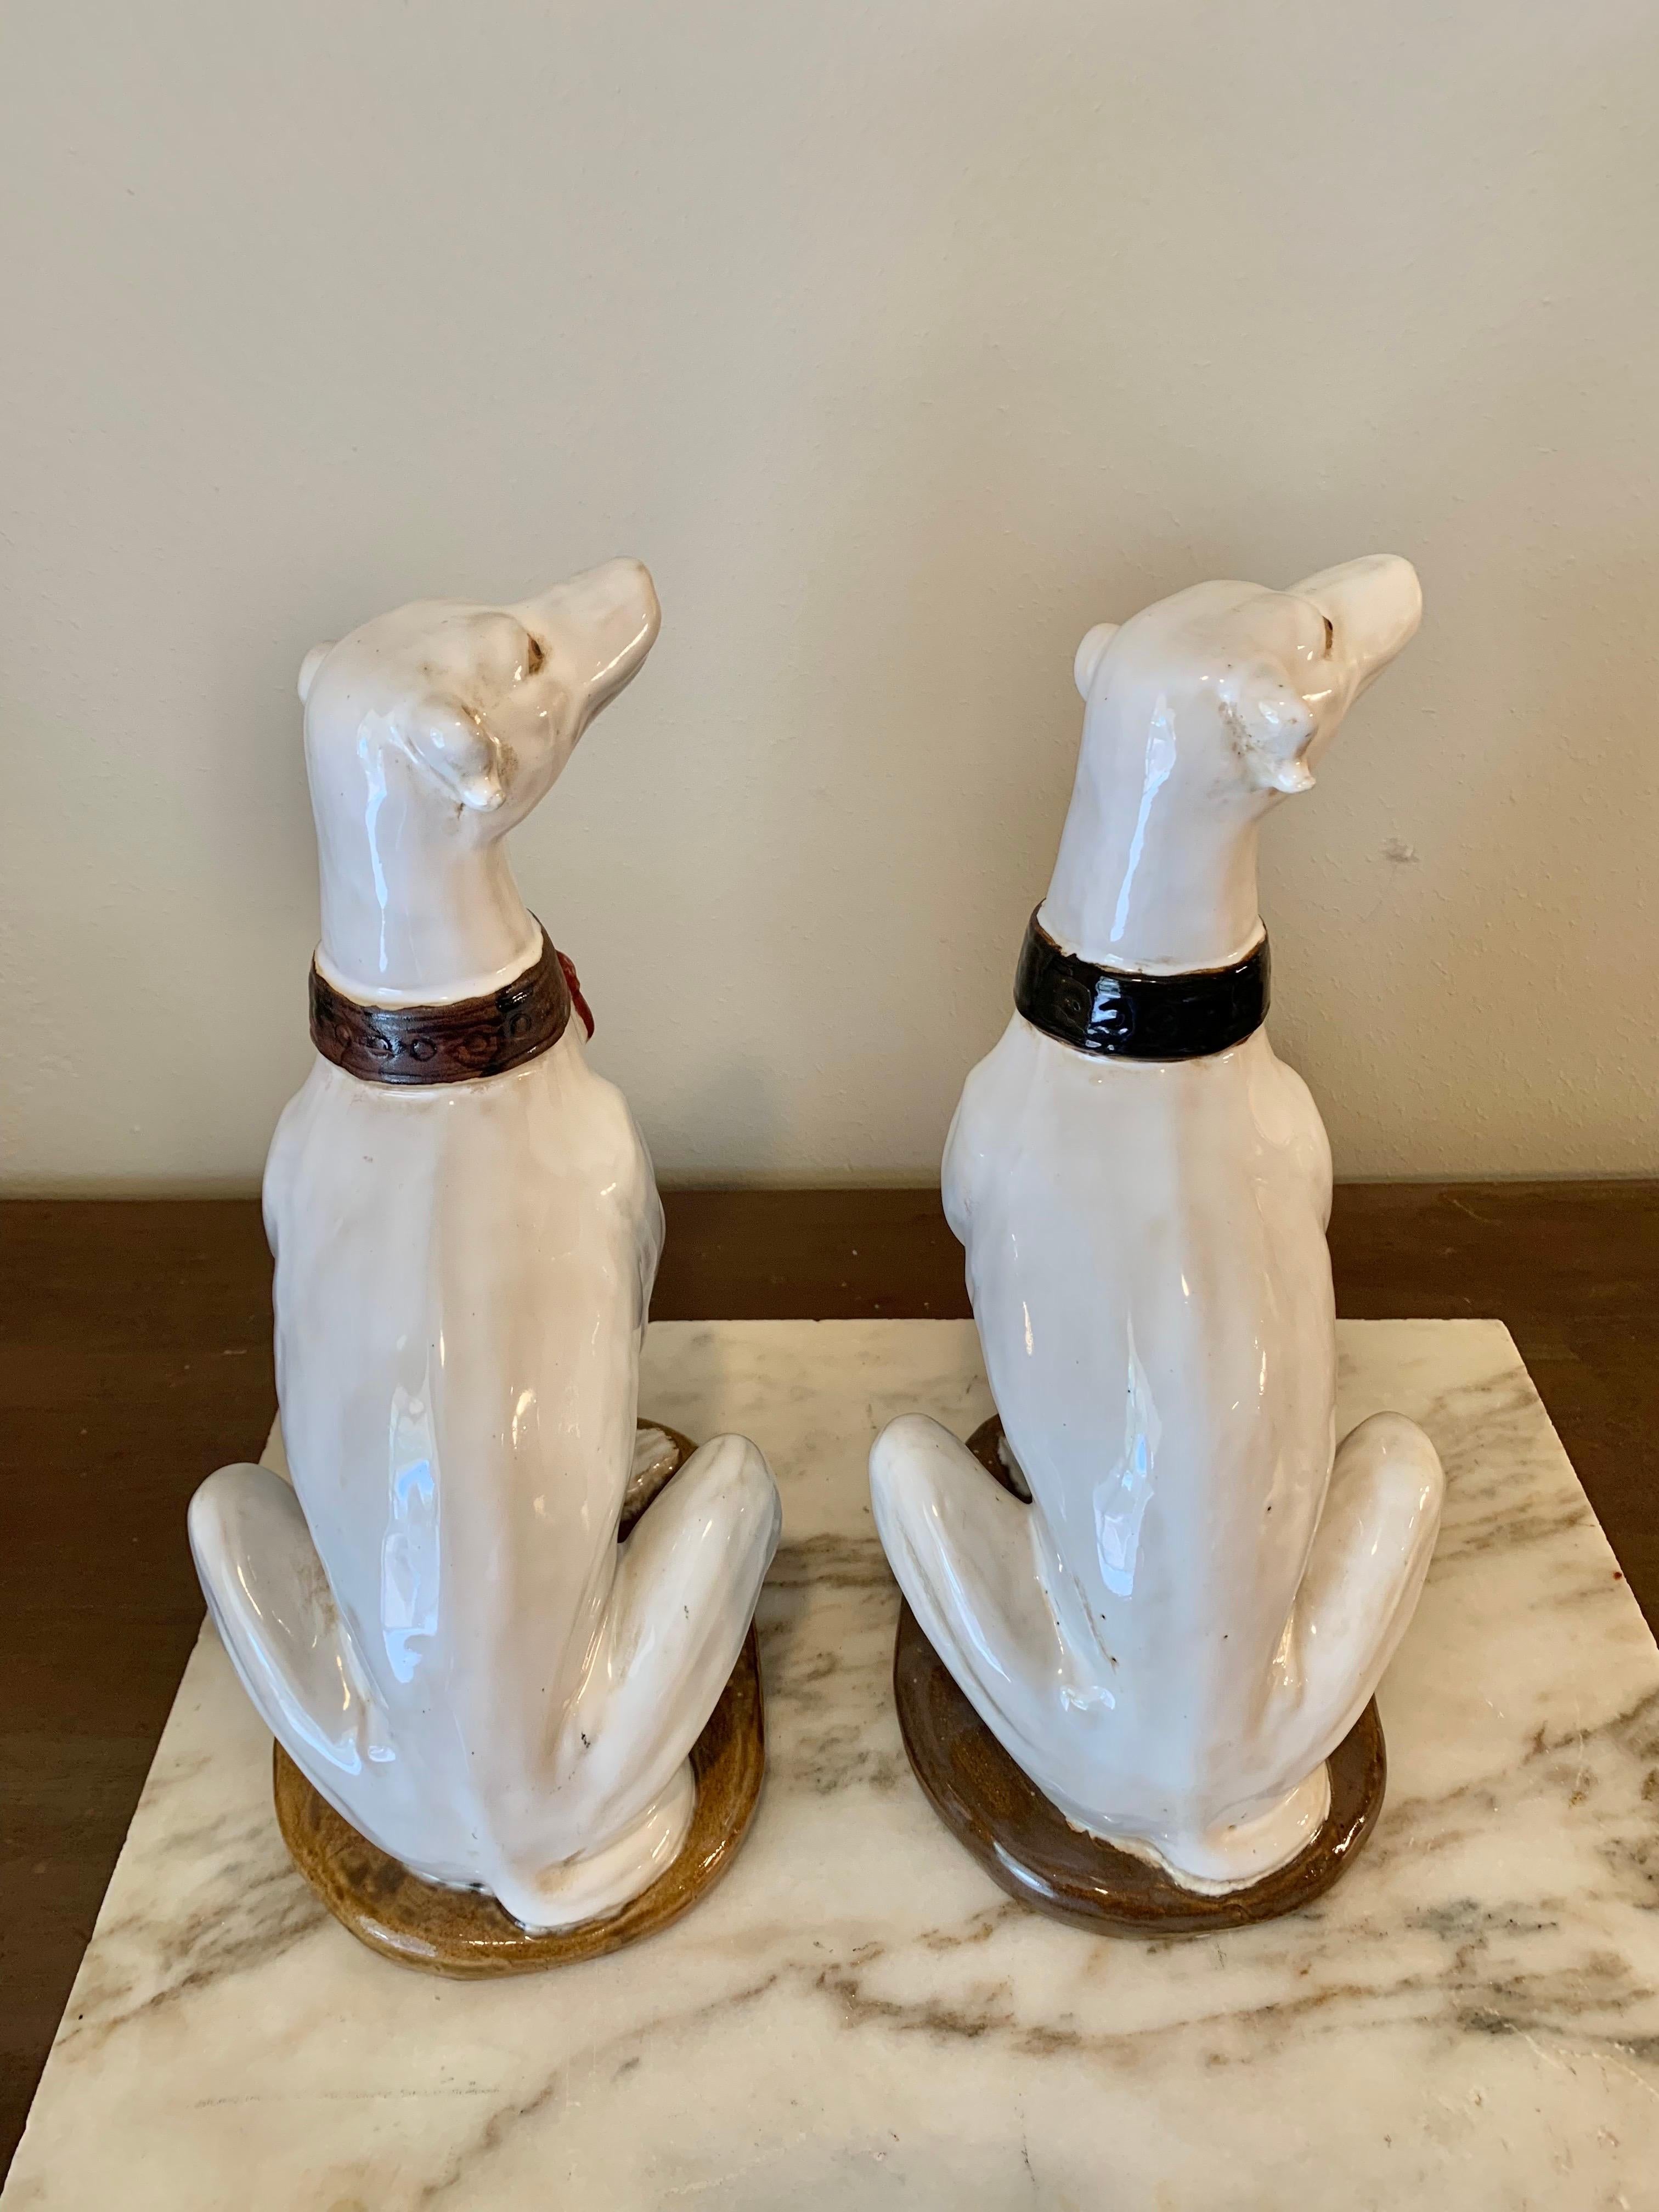 Hand-Crafted Mid 20th Century Italian Ceramic Whippet Sculptures - a Pair For Sale